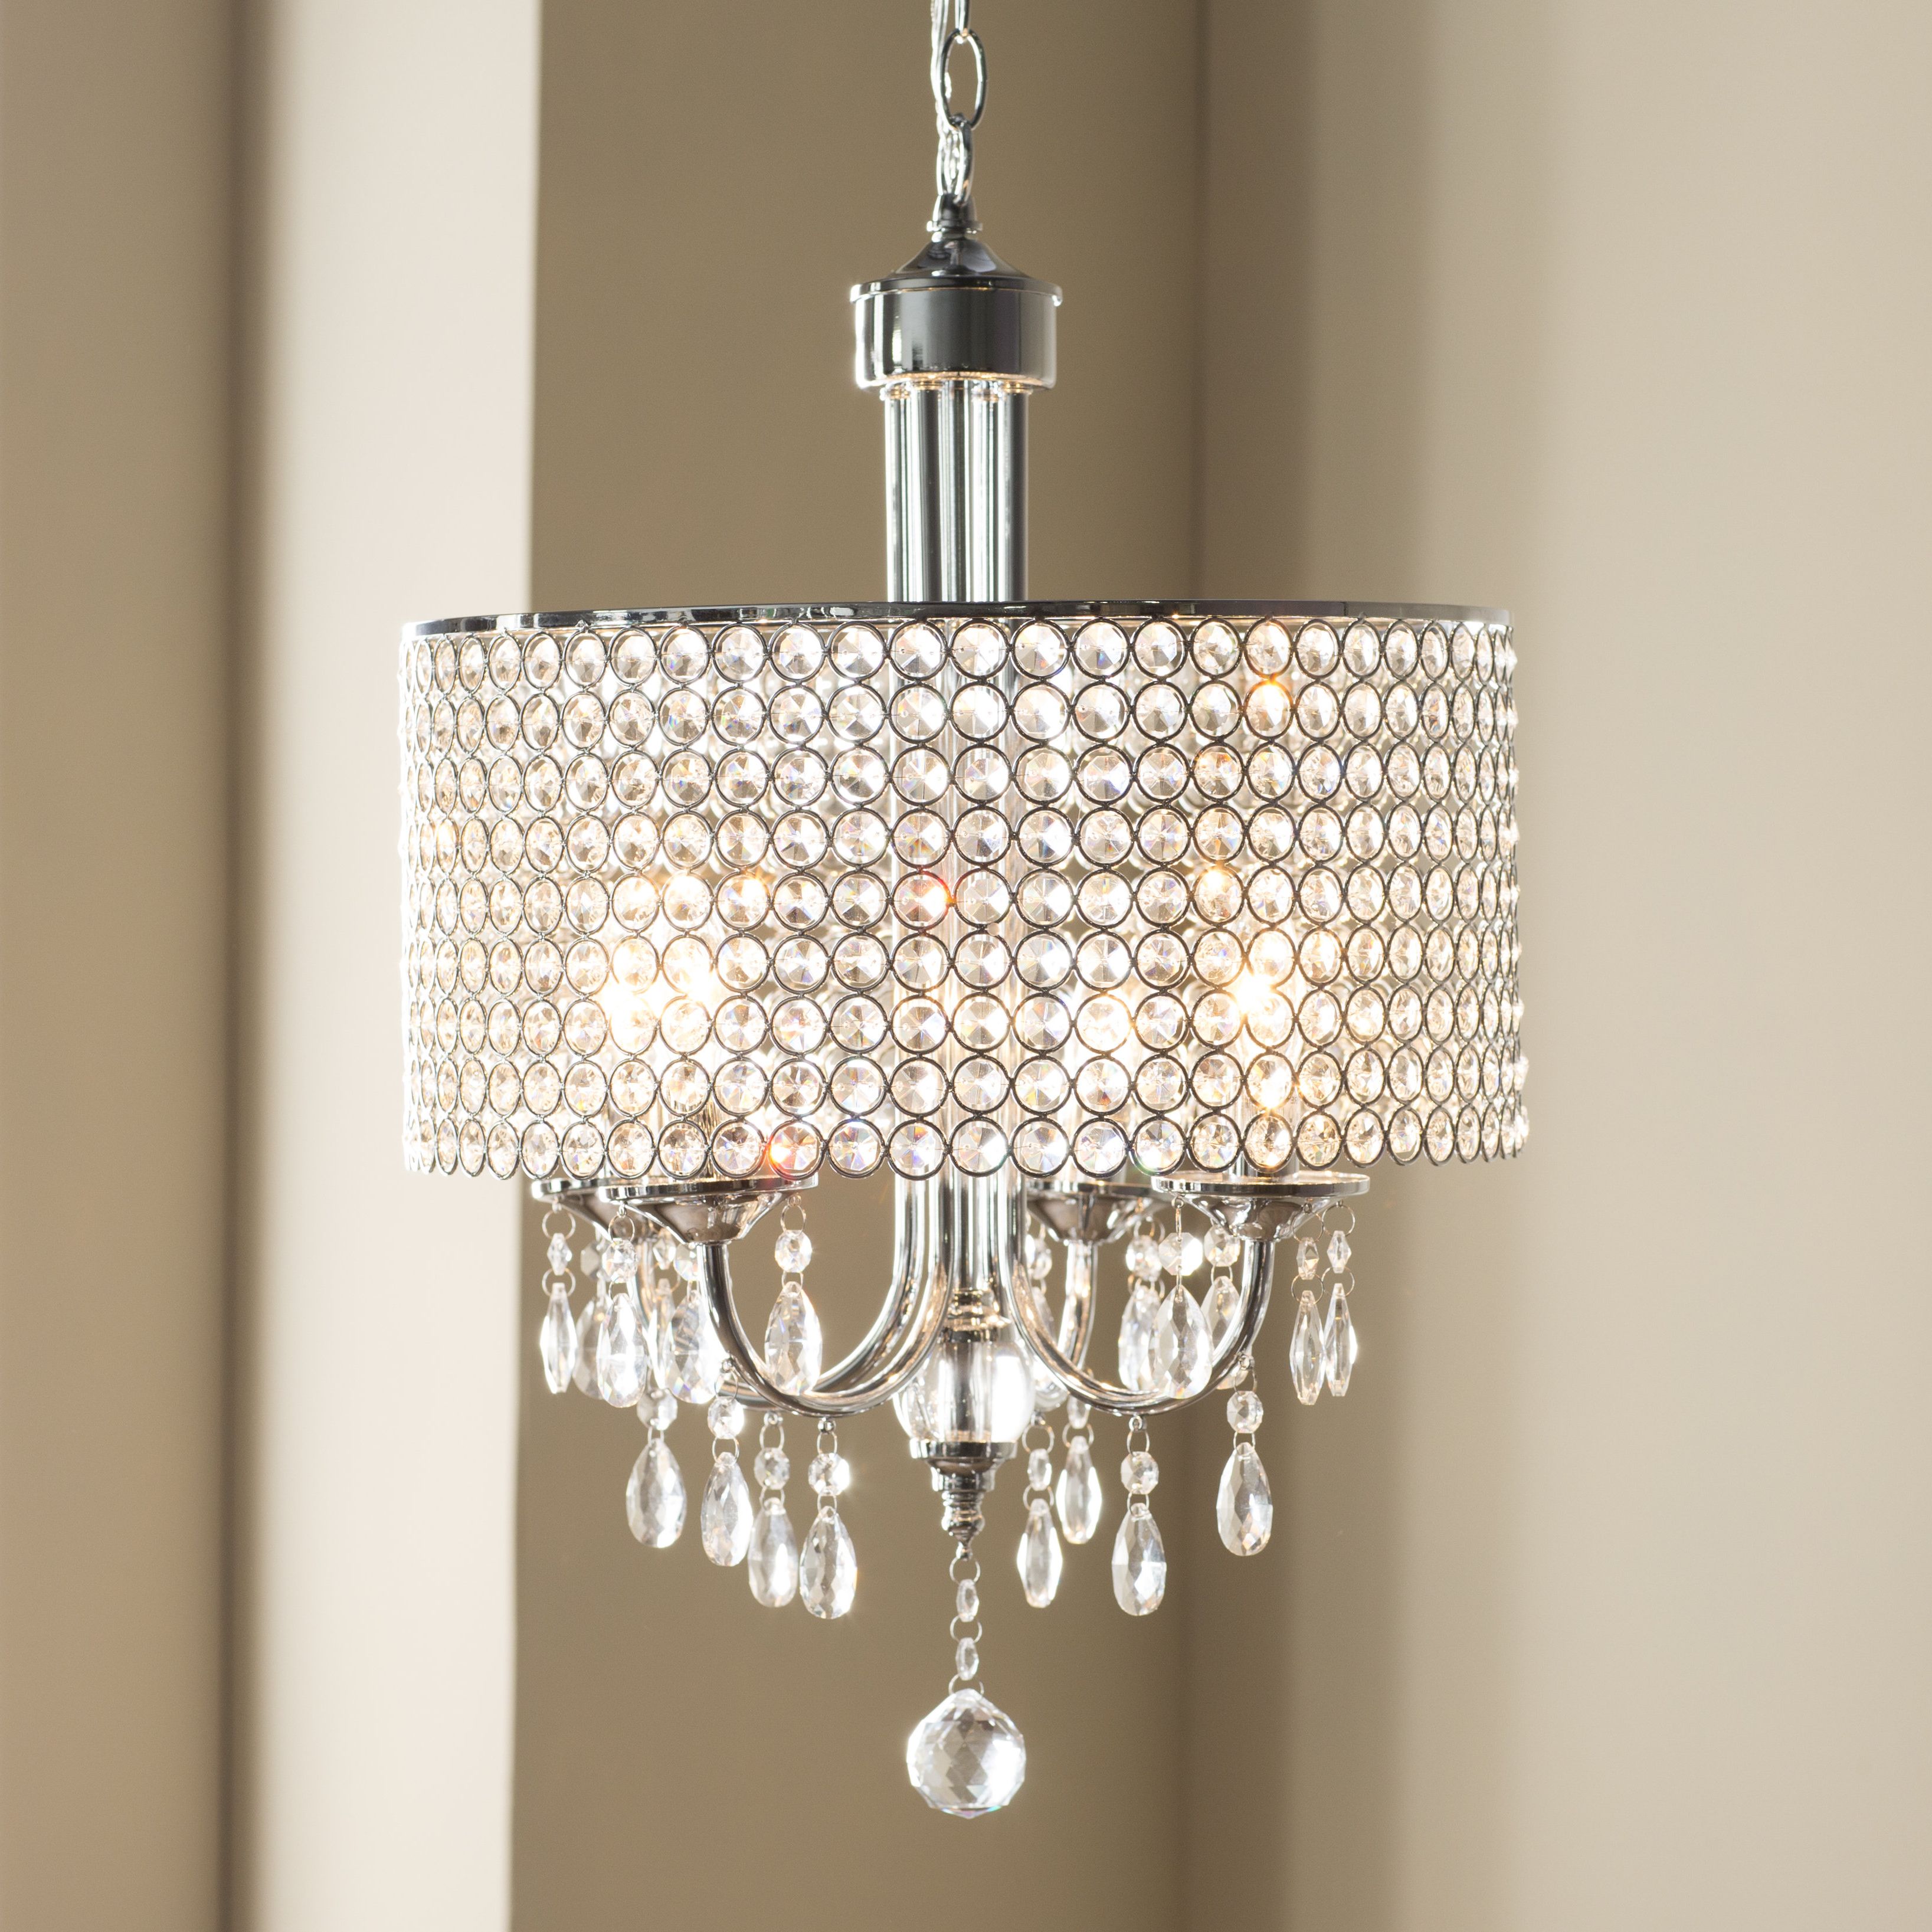 Bella 4 Light Crystal Chandelier Pertaining To Fashionable Aurore 4 Light Crystal Chandeliers (View 1 of 25)